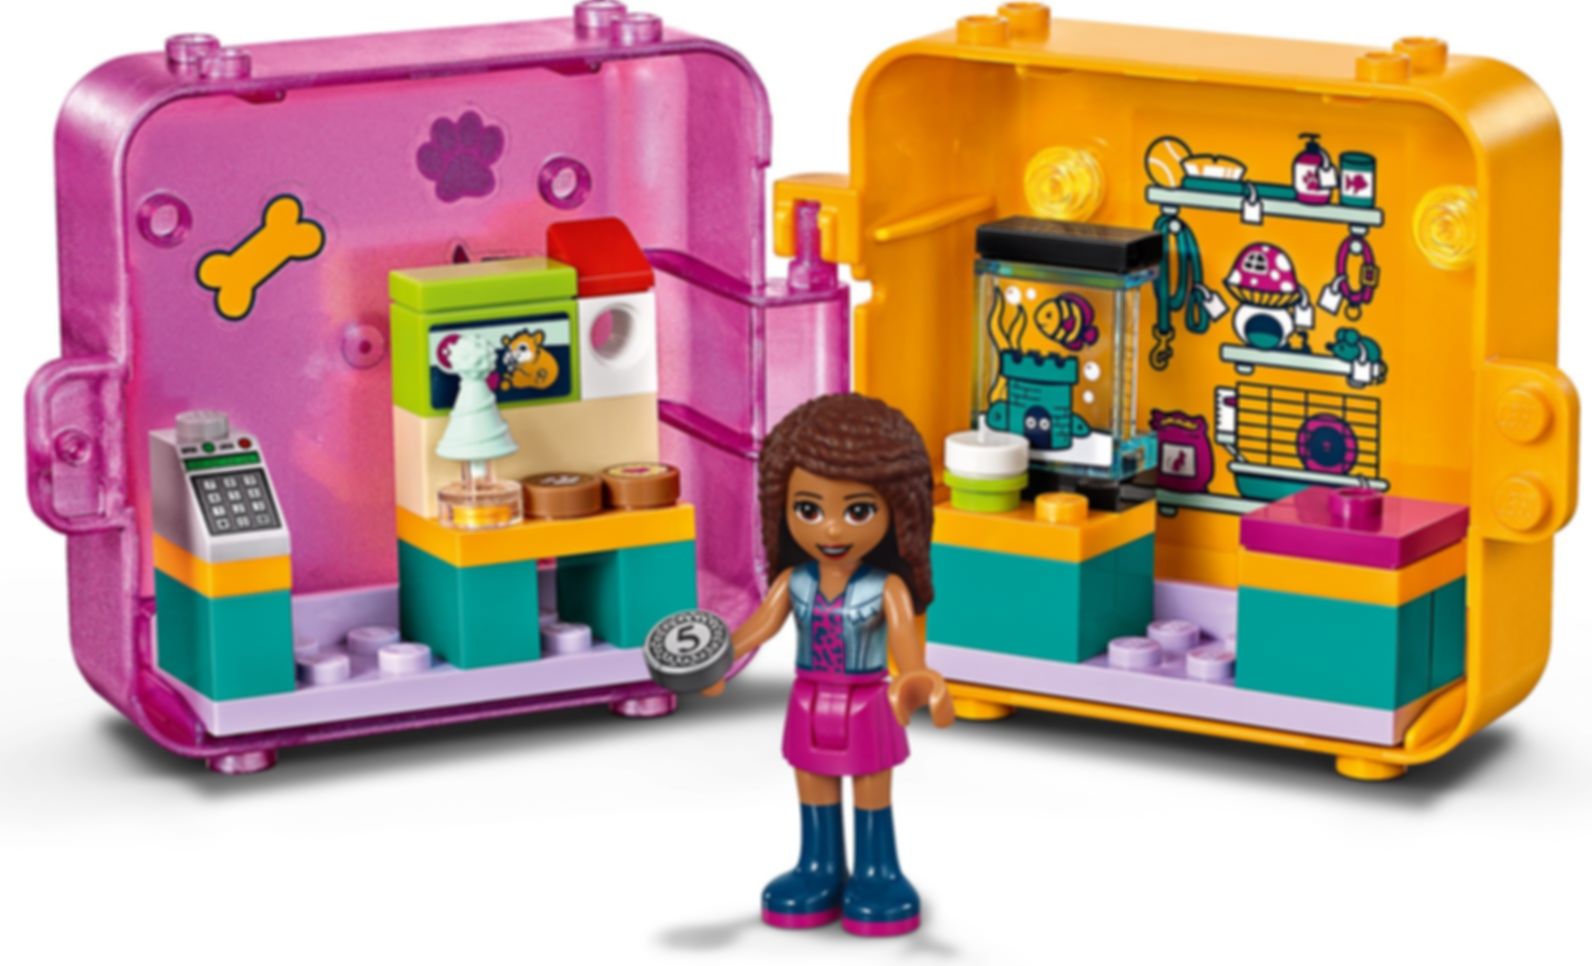 LEGO® Friends Andrea's Shopping Play Cube components